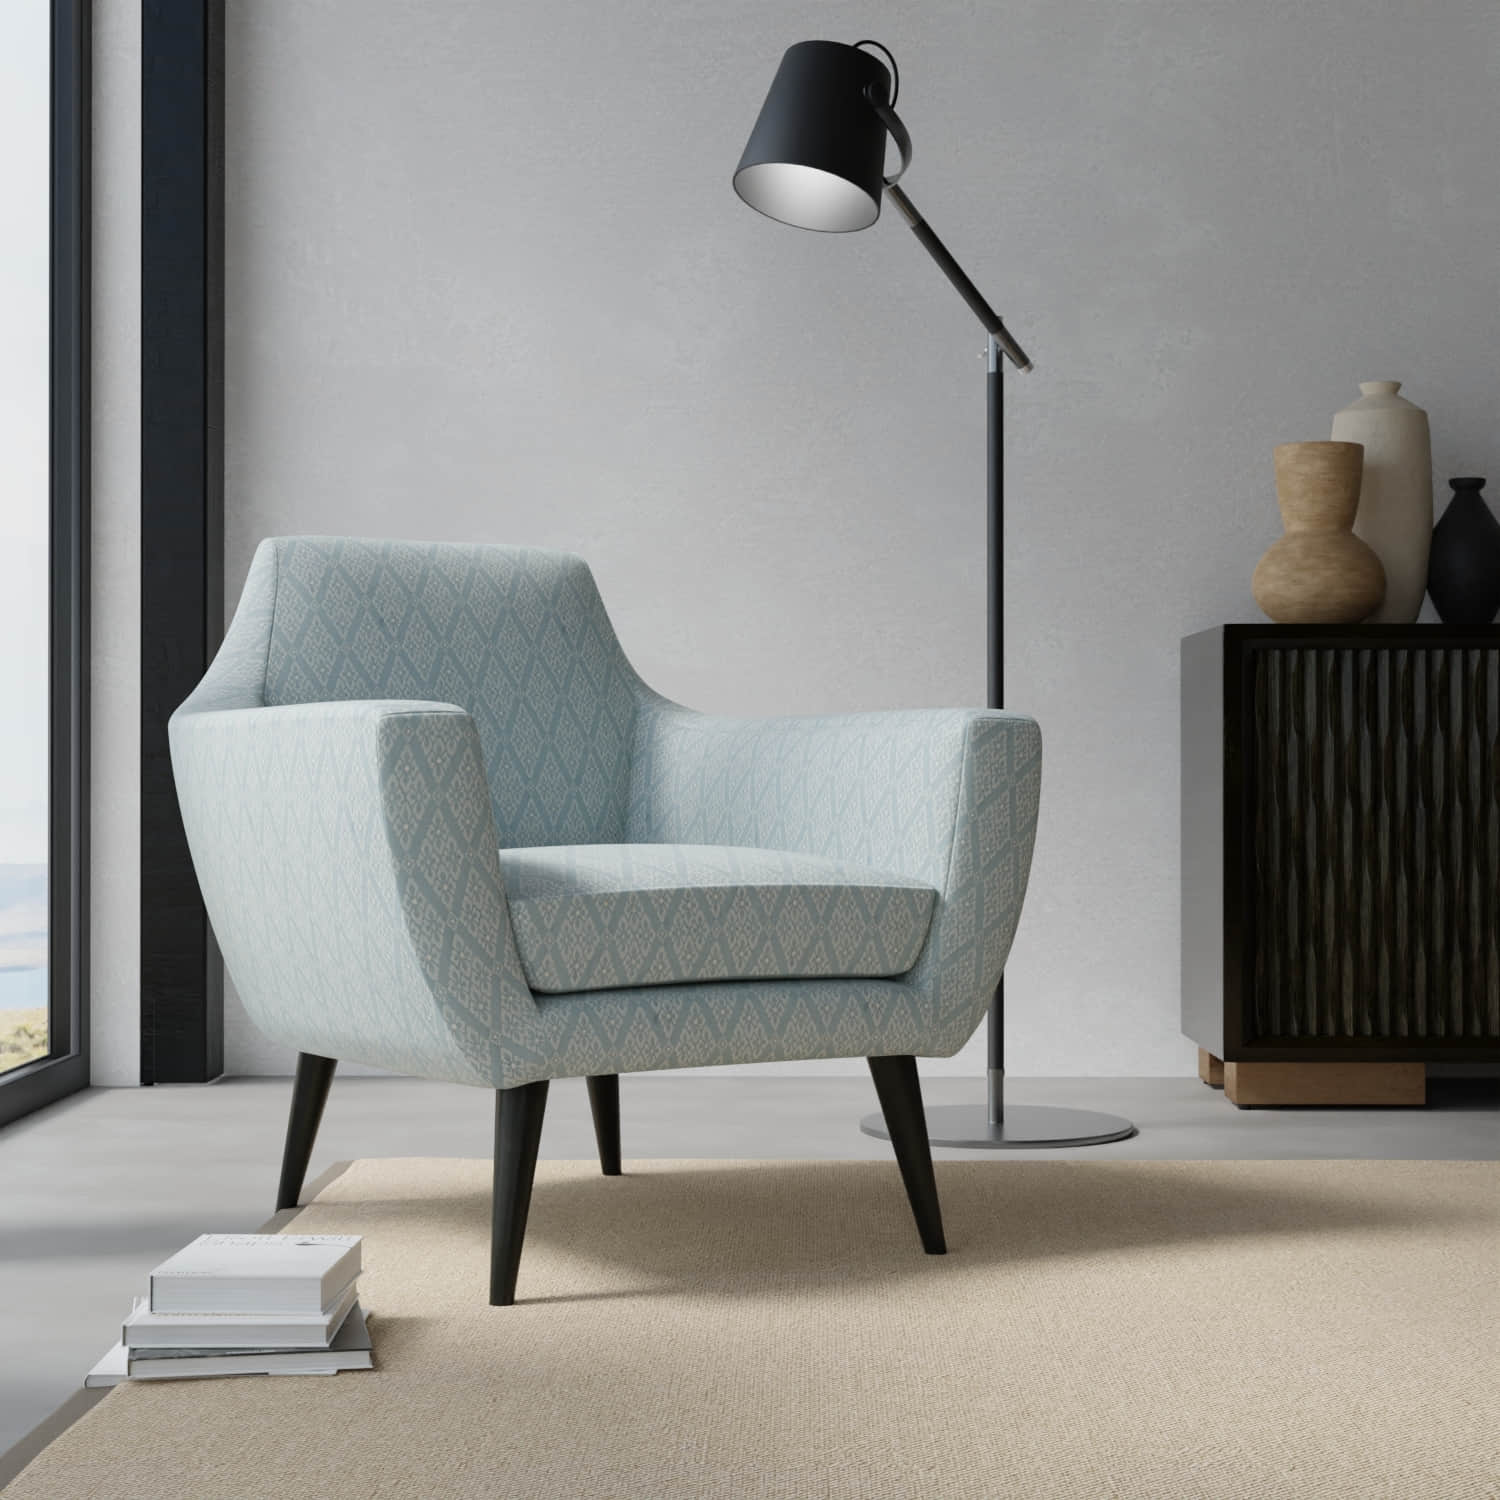 Waverly Azure upholstered on a contemporary chair